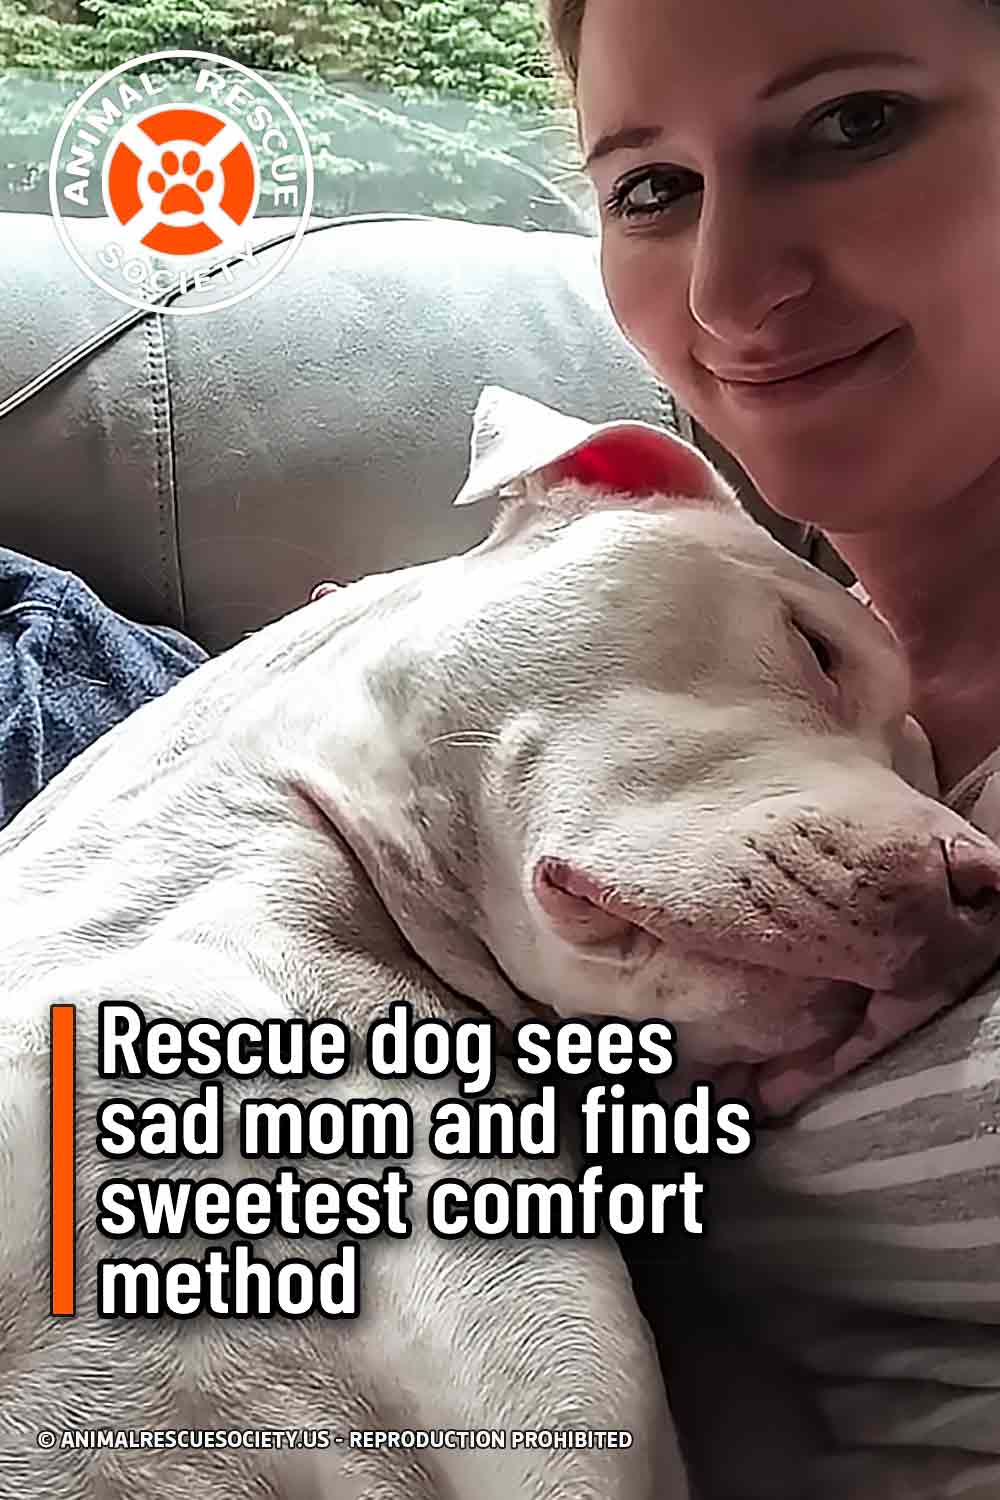 Rescue dog sees sad mom and finds sweetest comfort method